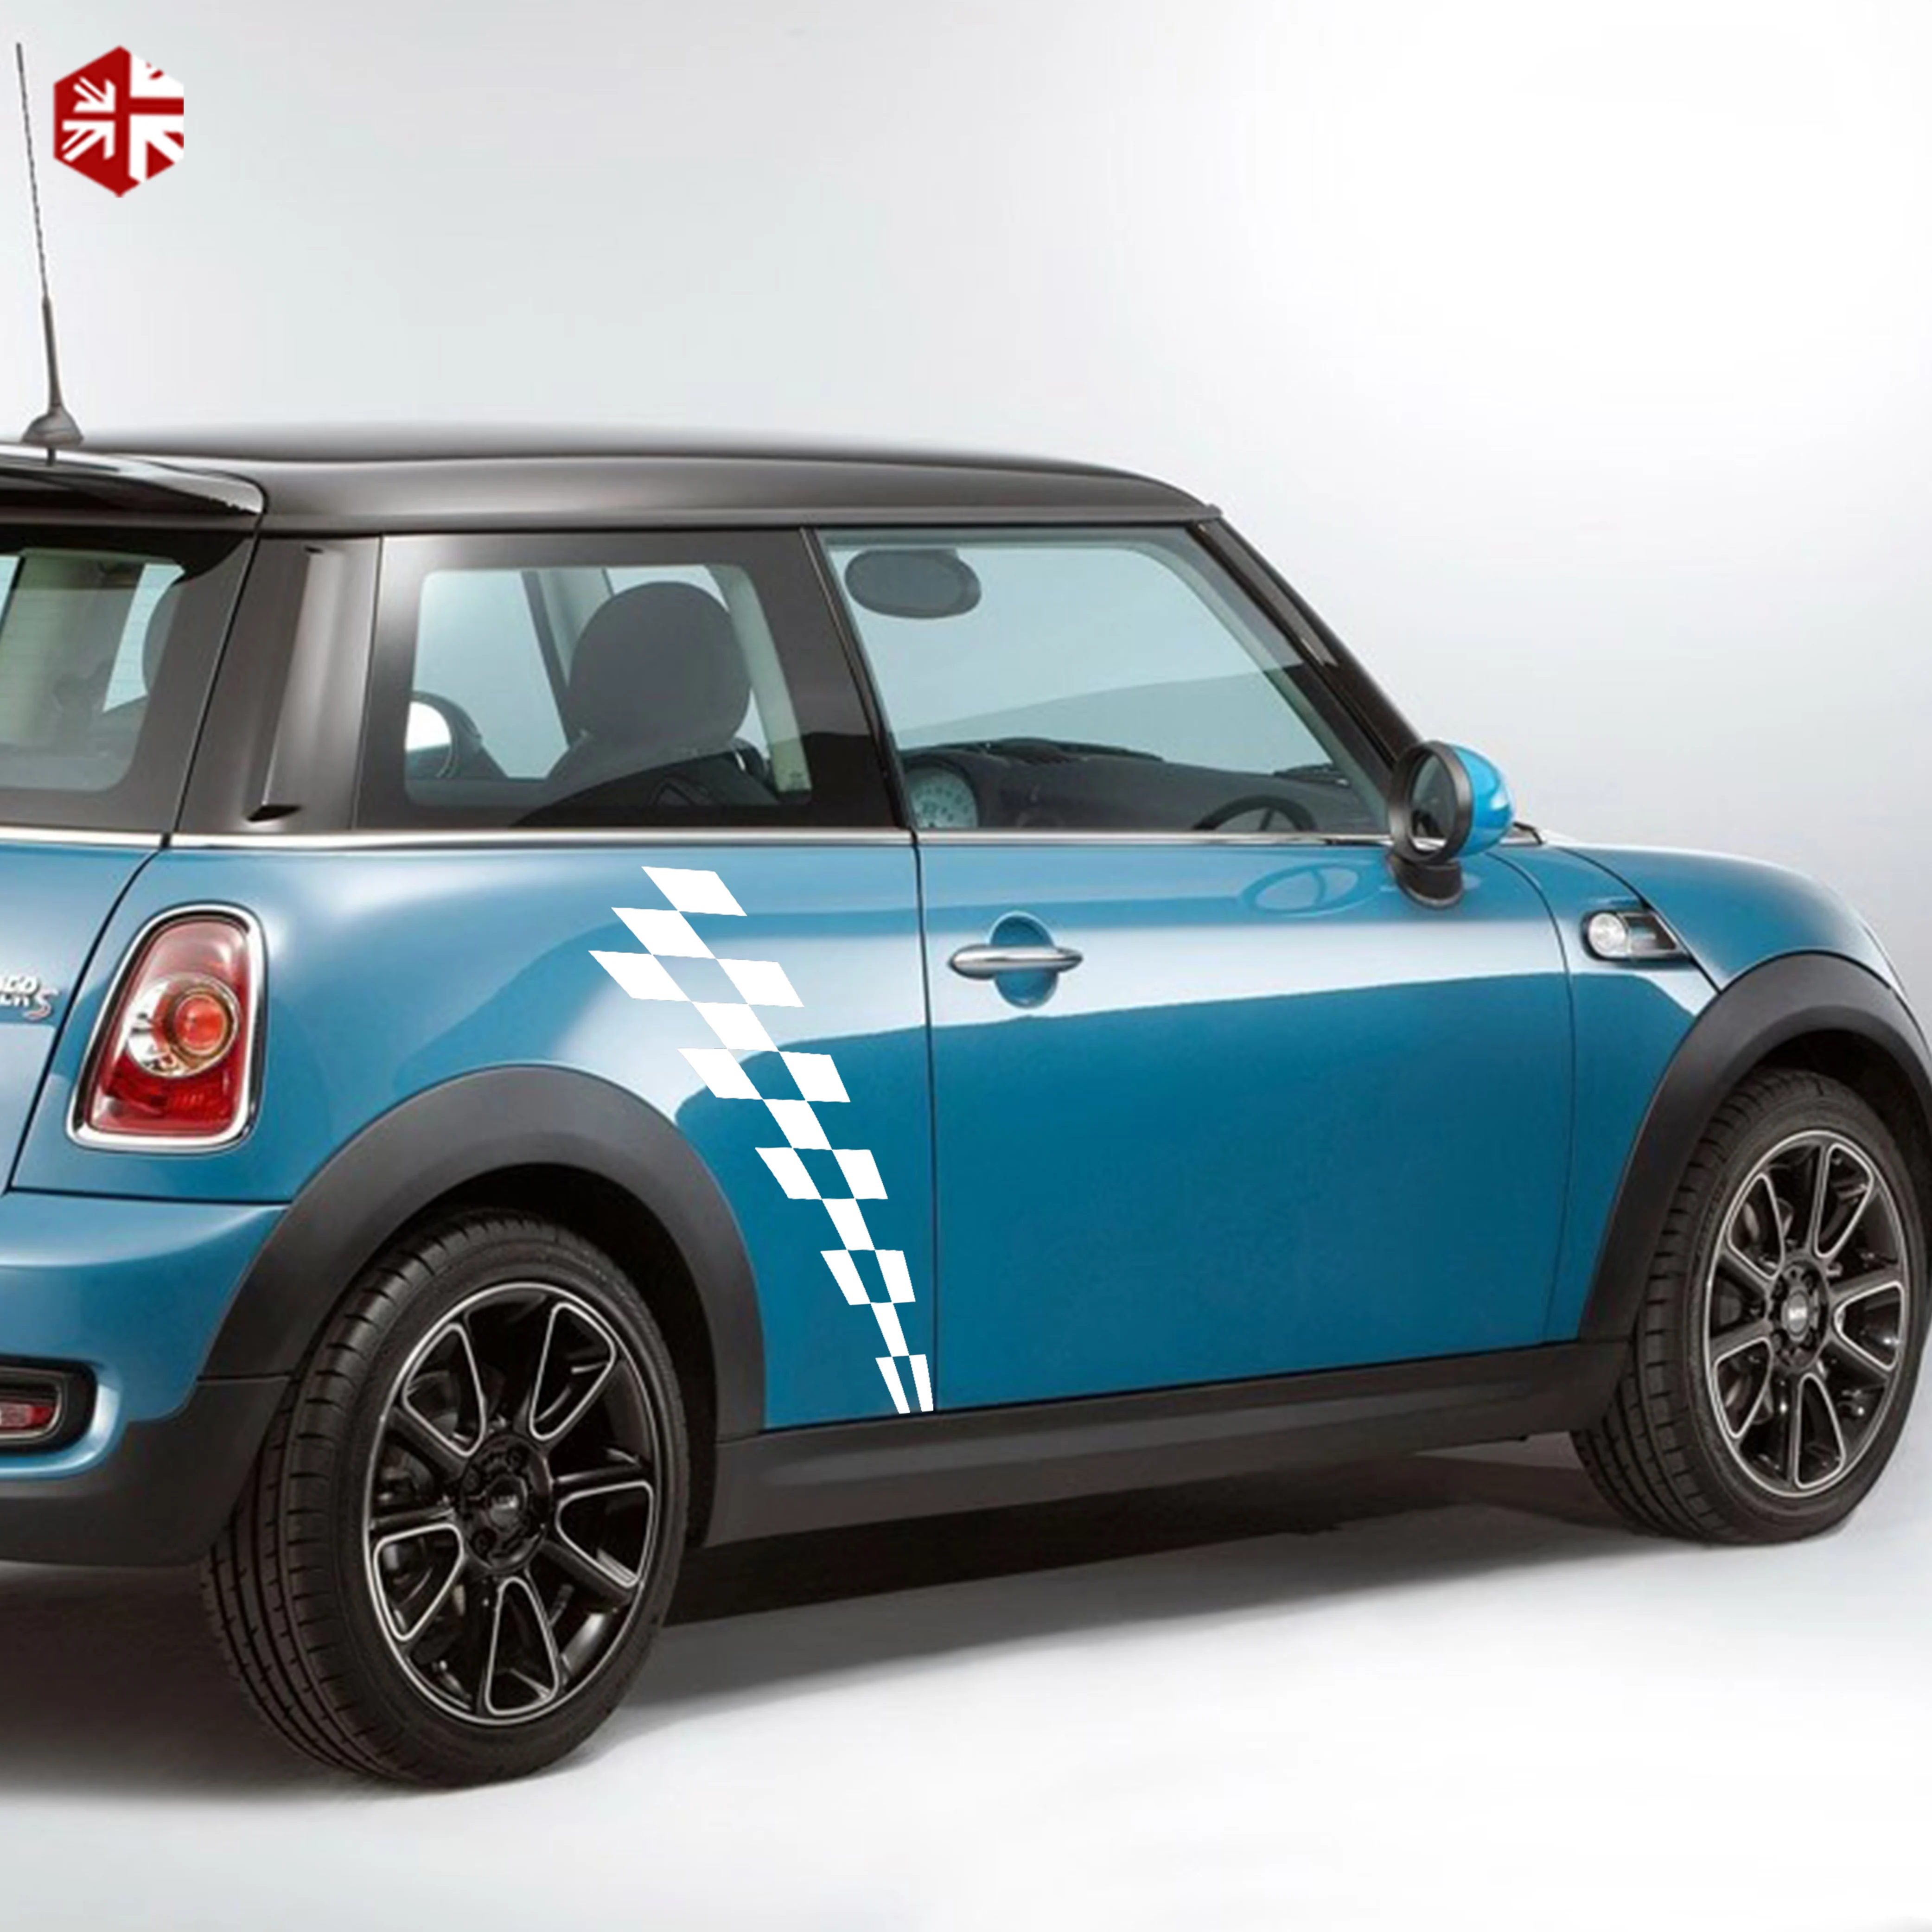 2 Pcs Checkered Flag Styling Car Door Side Stripes Sticker Body Body Decal For MINI Cooper S R56 2206-2013  JCW One Accessories